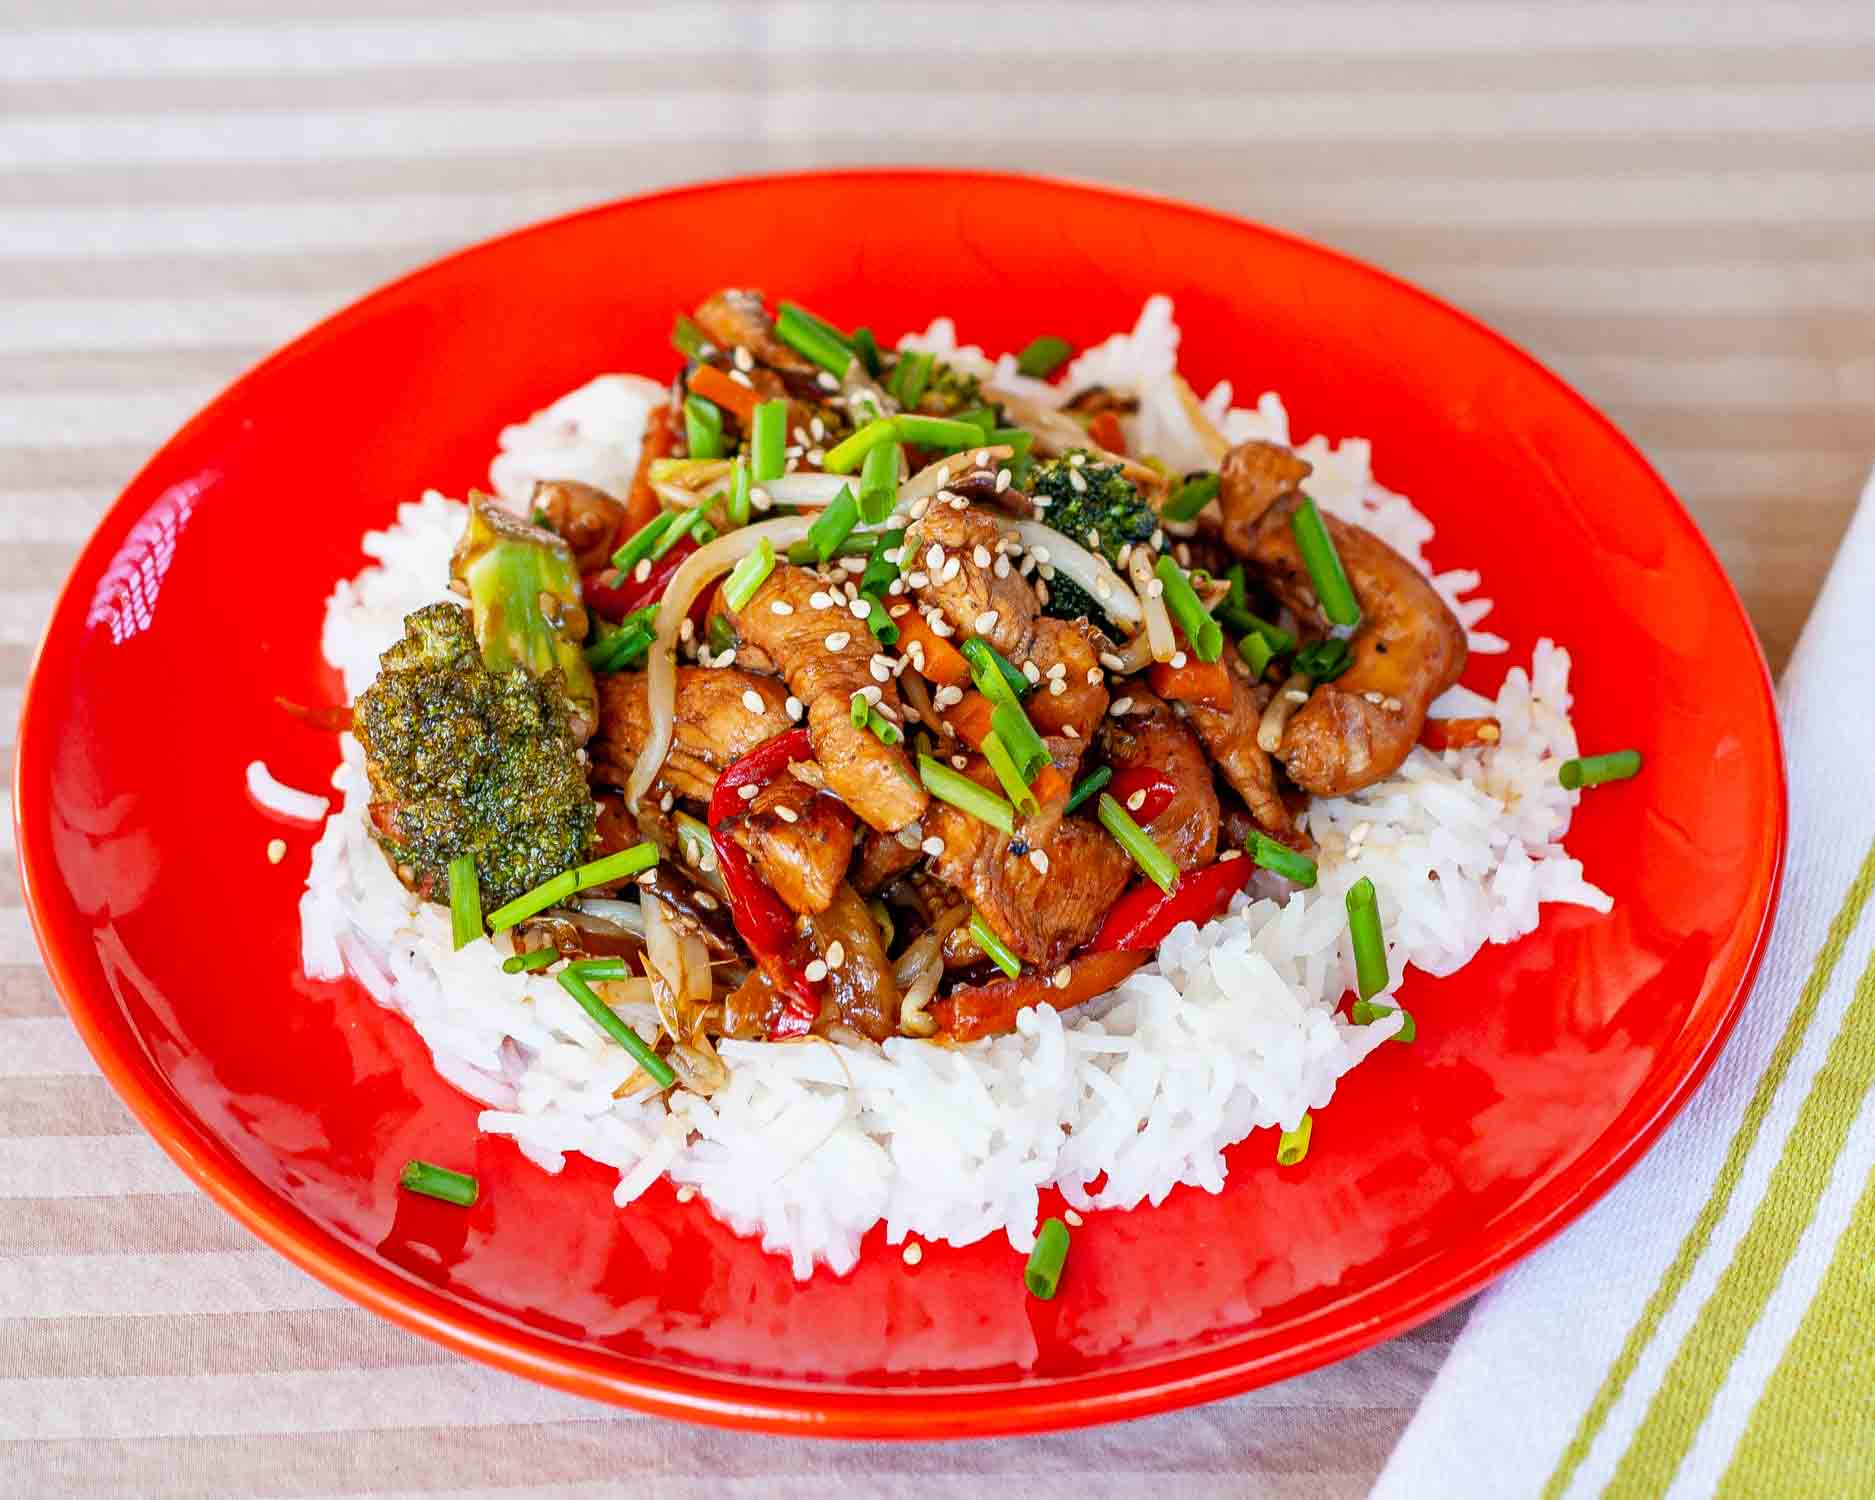 chicken stir fry on a bed of rice on a red plate.